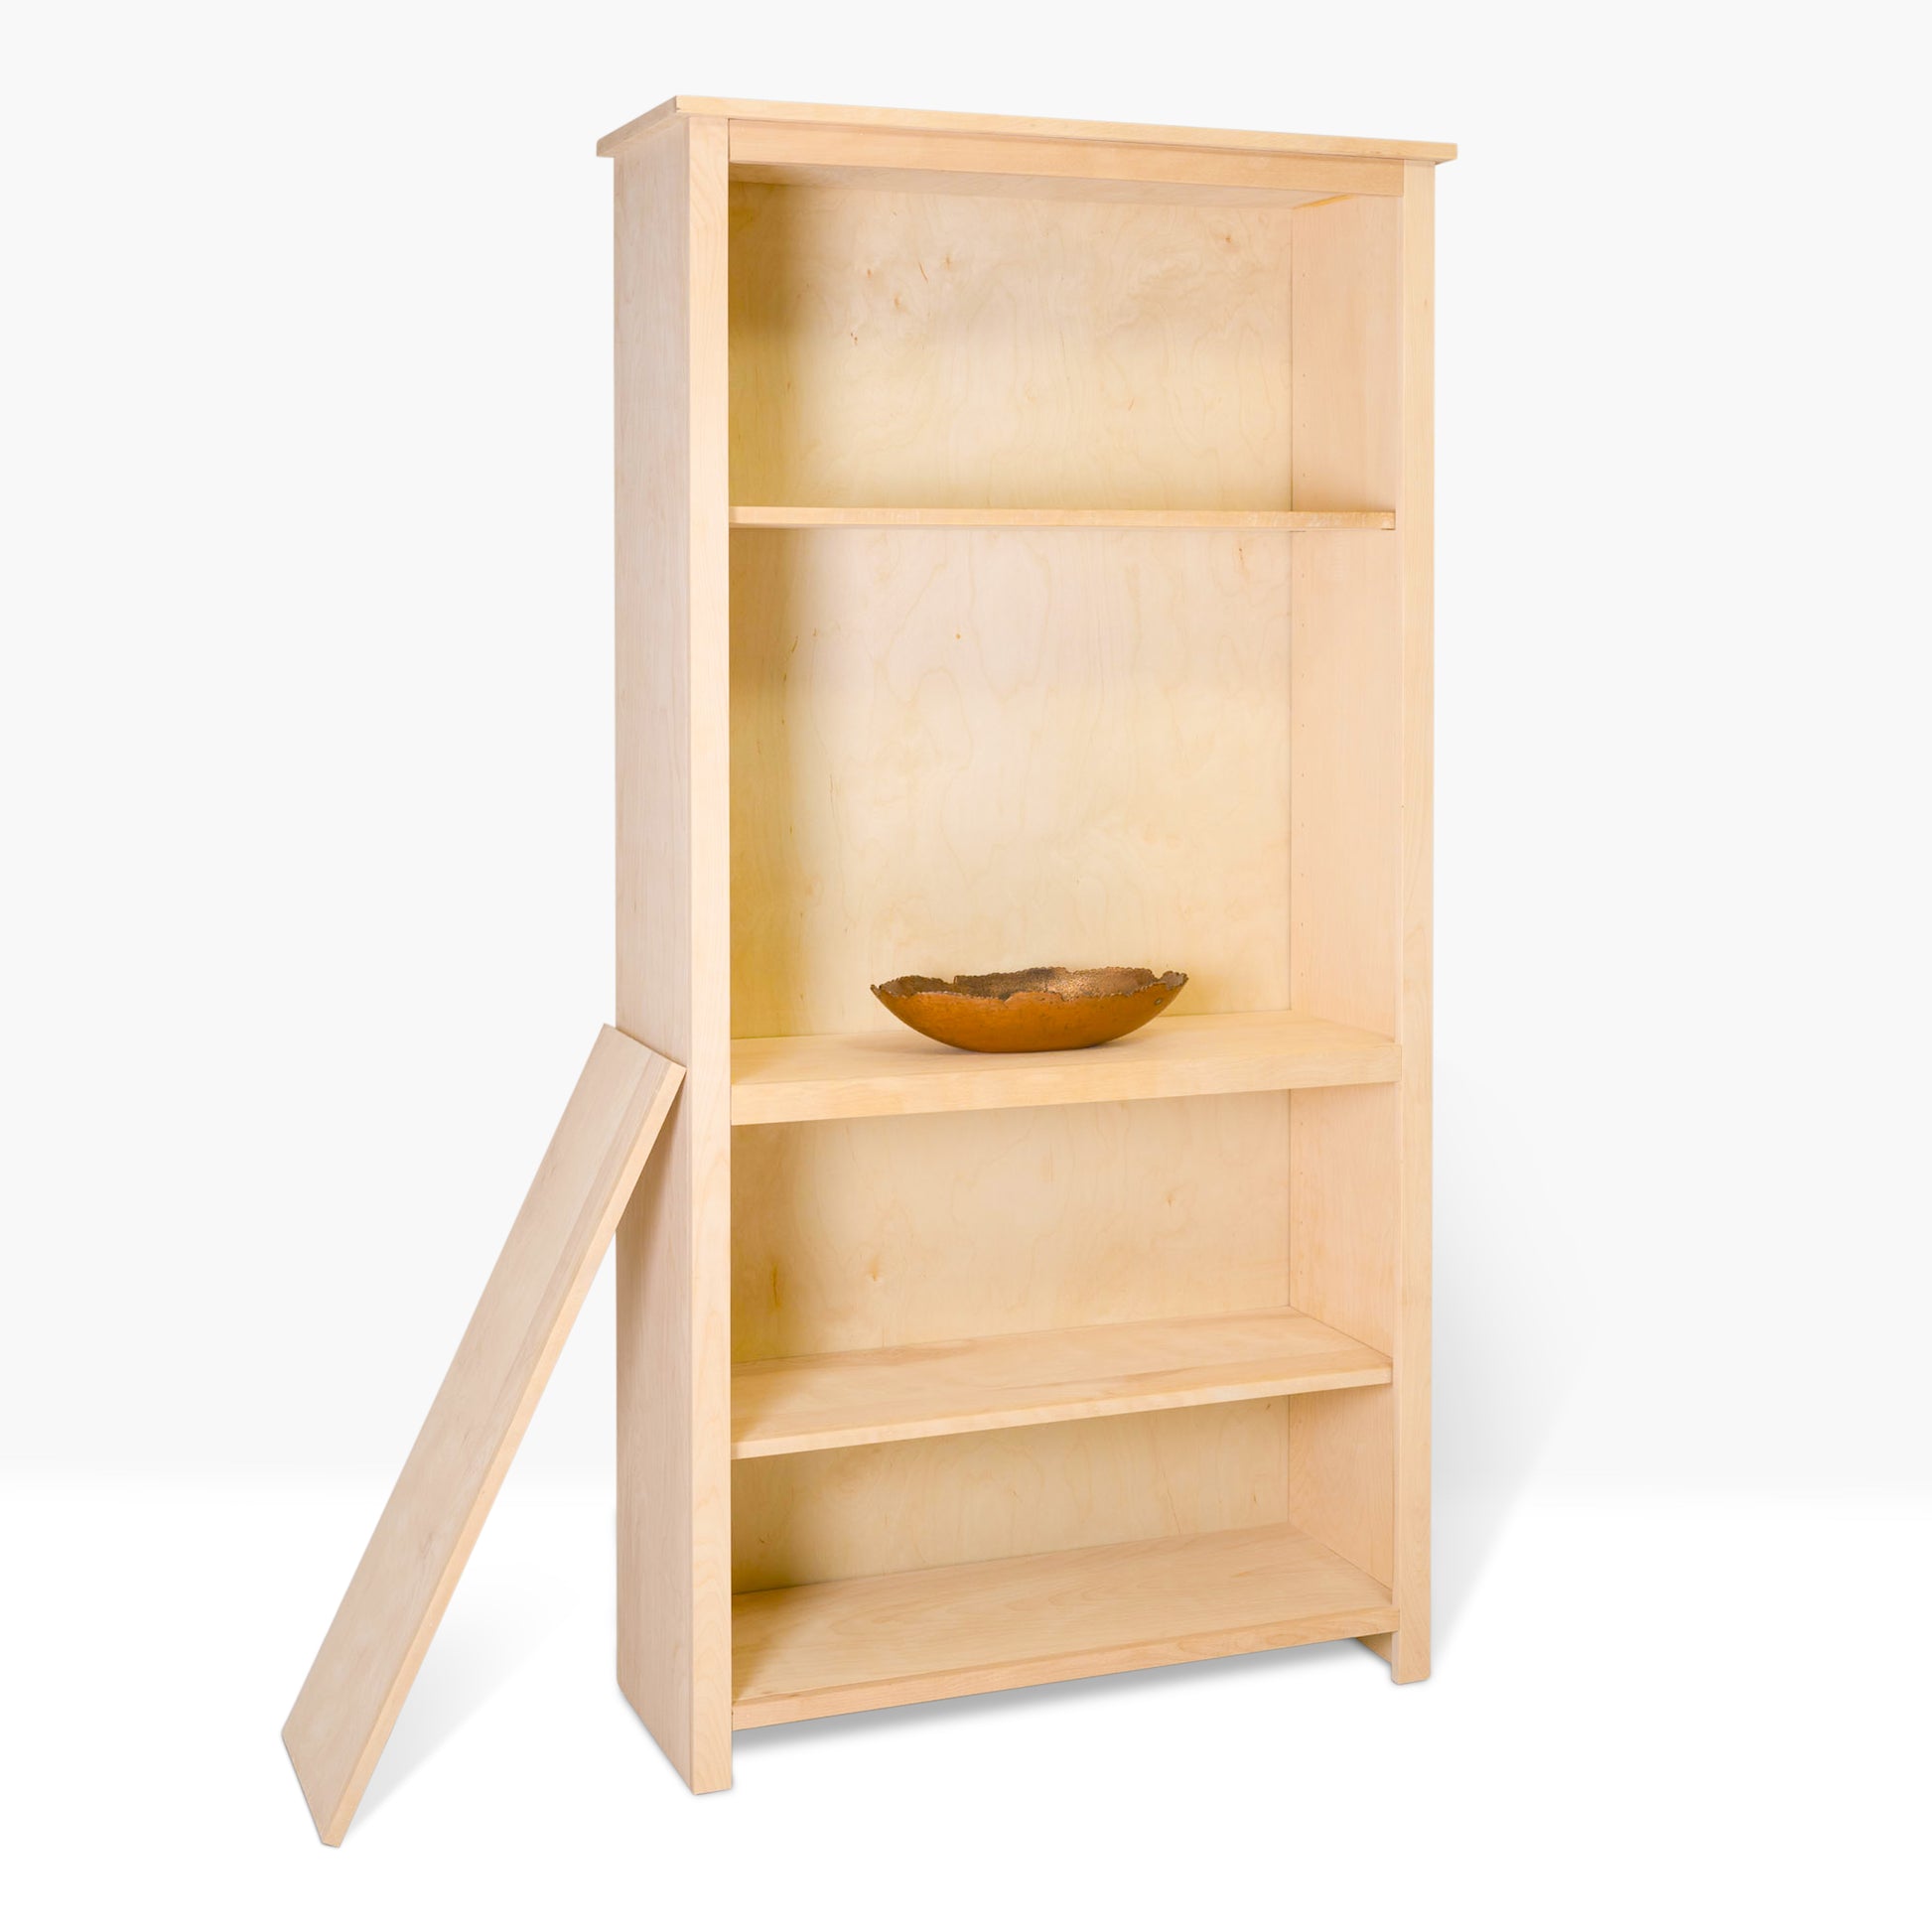 Berkshire Easton Bookcase, made from birch, and pictured unfinished.